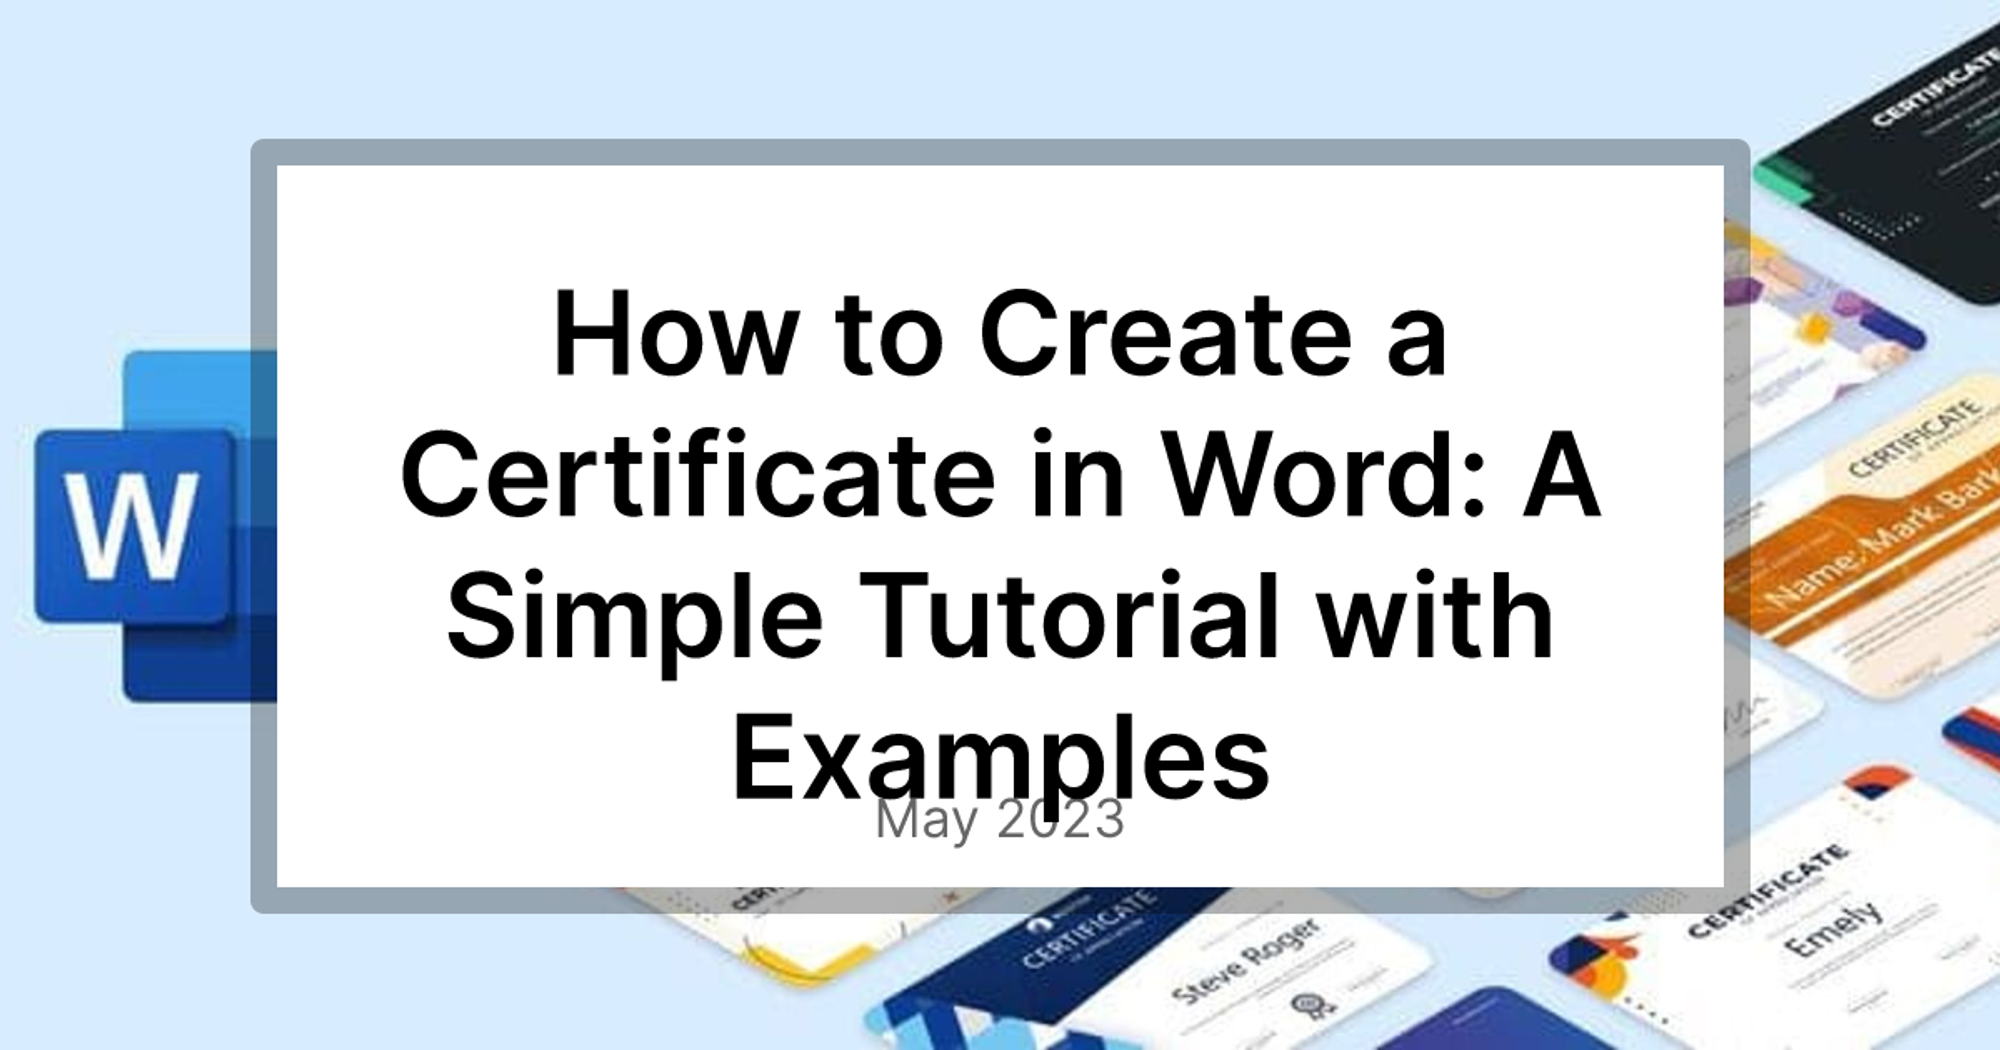 Create a Certificate in Word: A Step-by-Step Guide